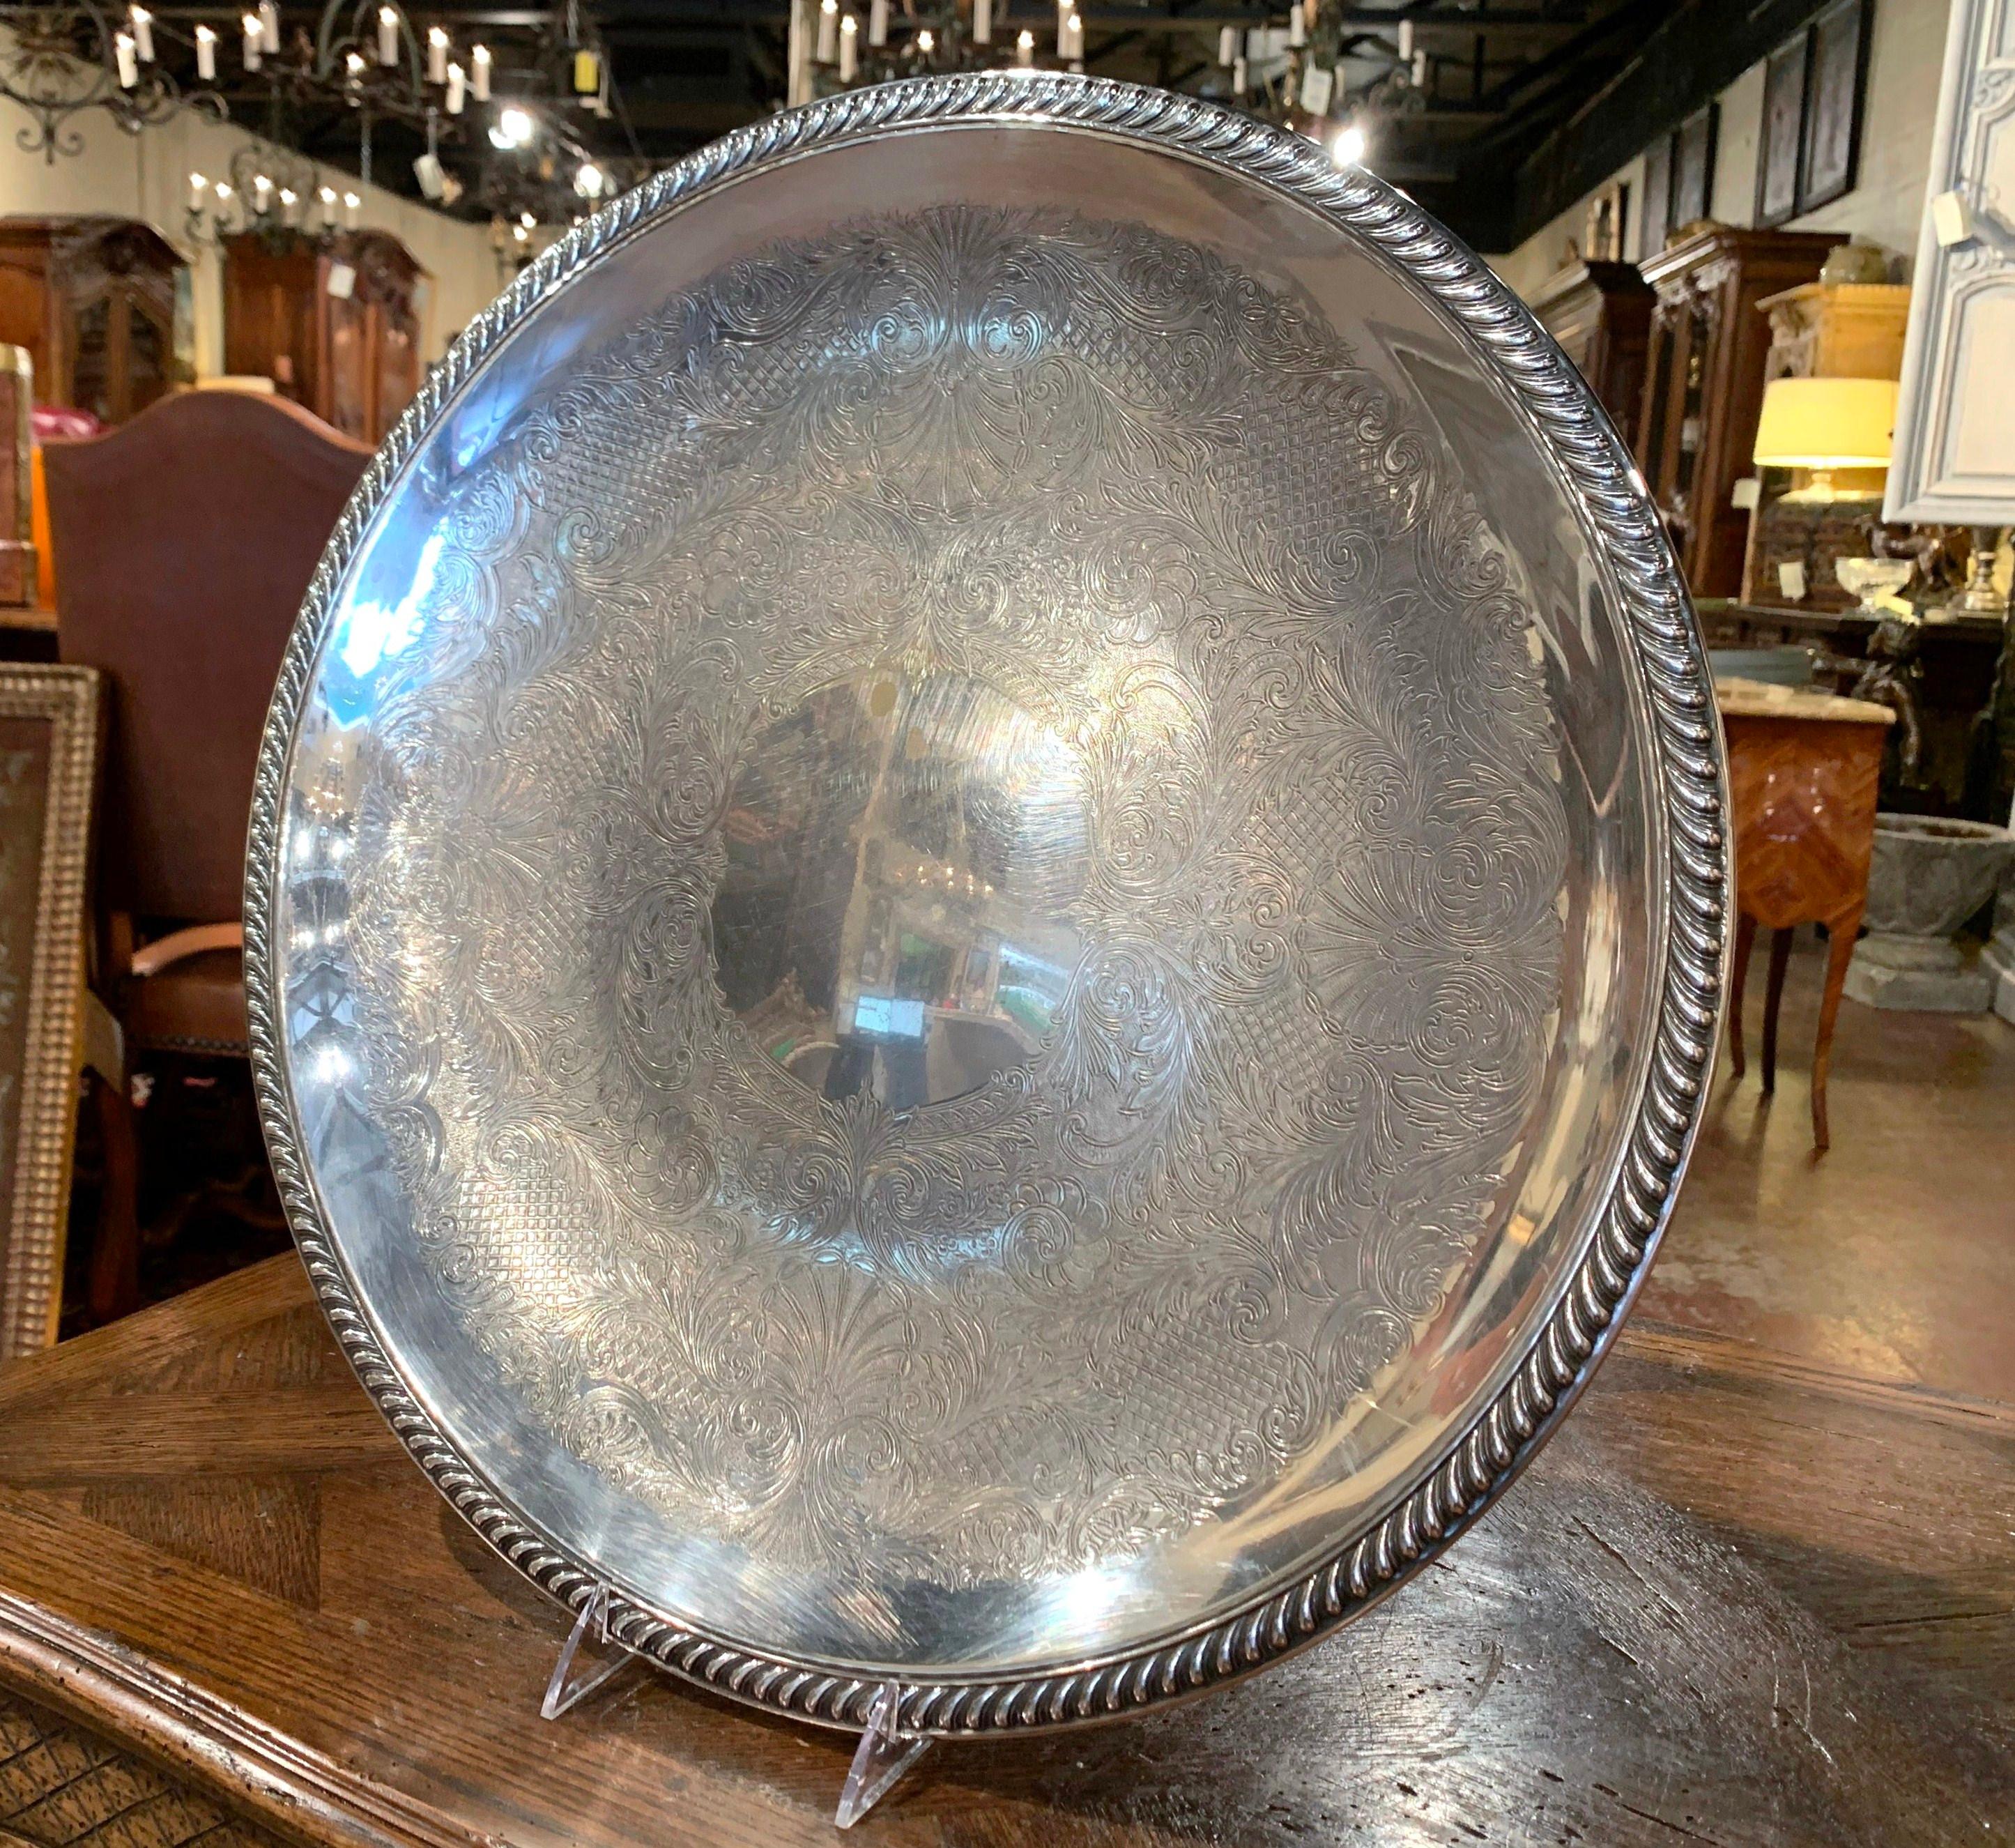 Created in France circa 1920, and round in shape, the large brass tray with silver plate features engraved floral and shell decor with a repousse motif around the rim. The decorative tray is in excellent condition commensurate with age and use with